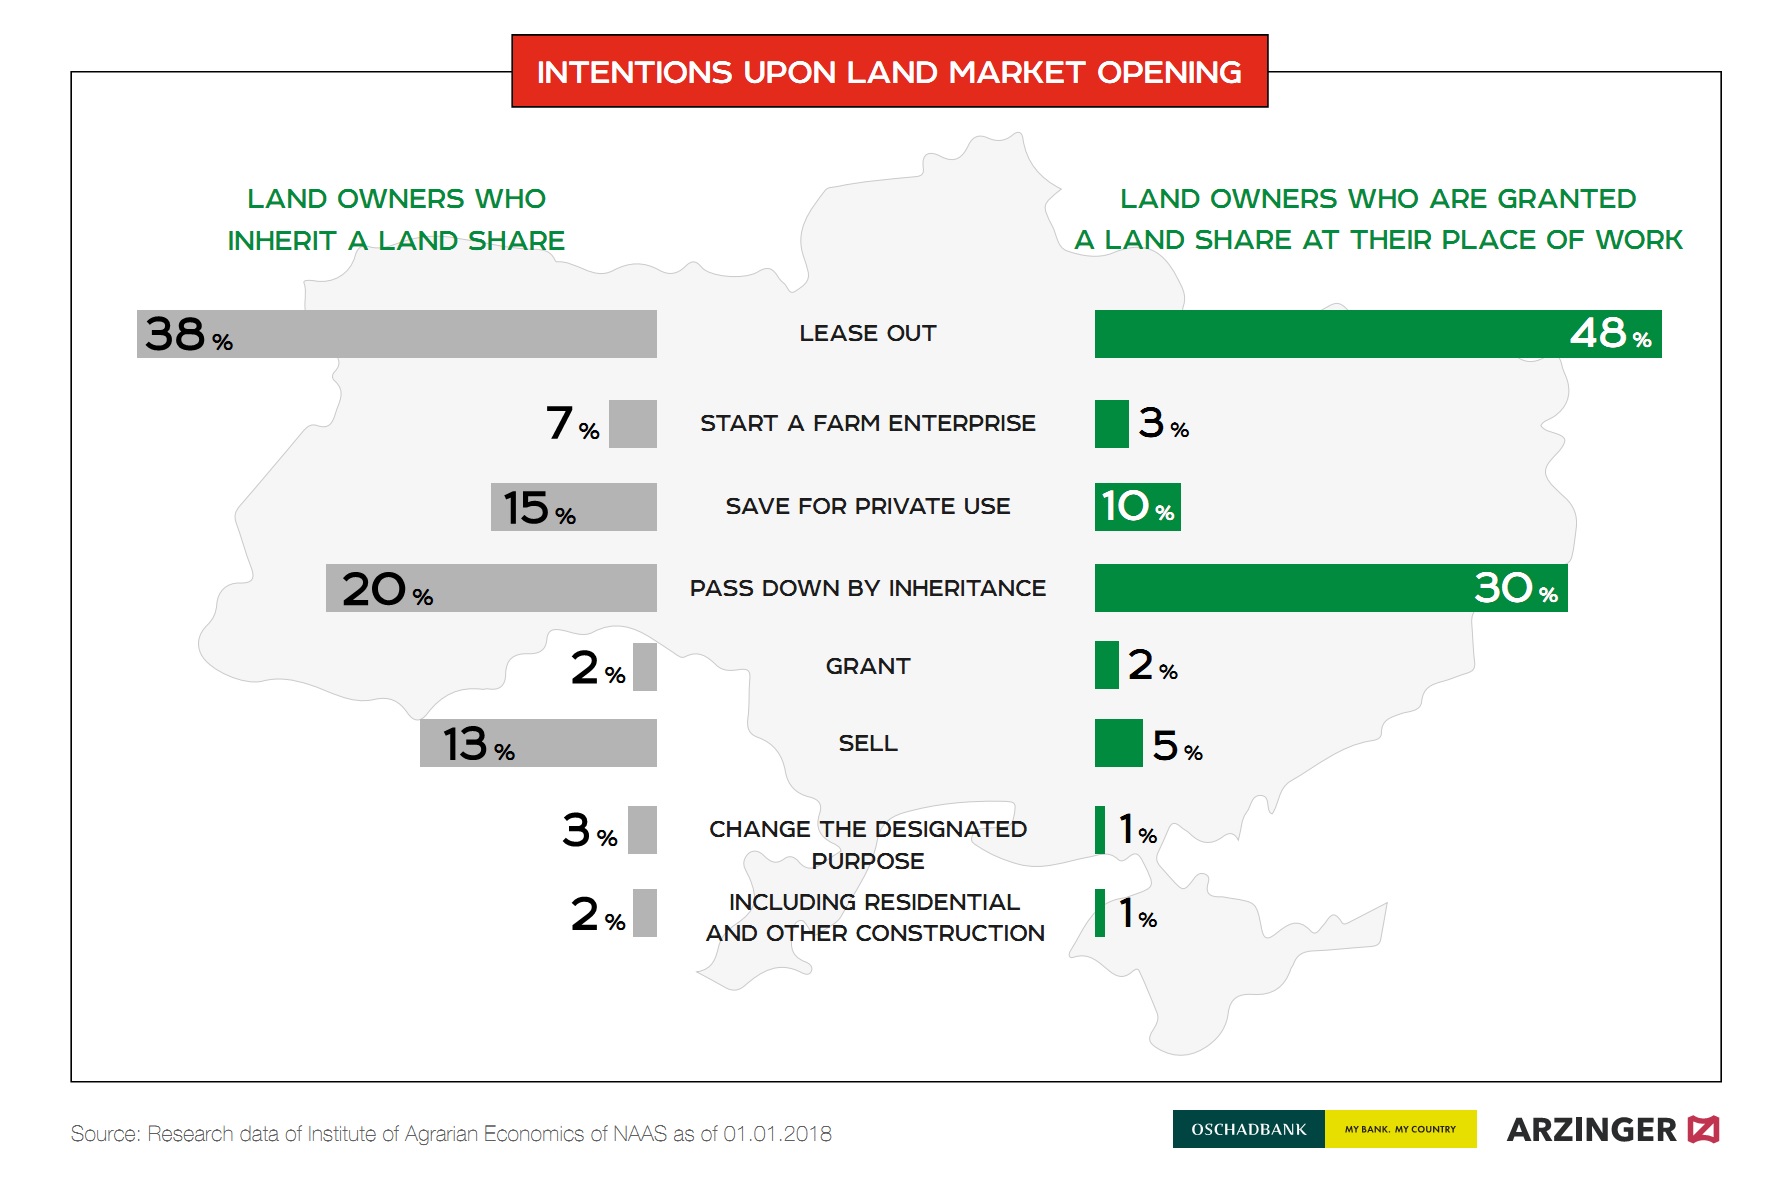 Intentions upon land market opening in Ukraine (click for full resolution)